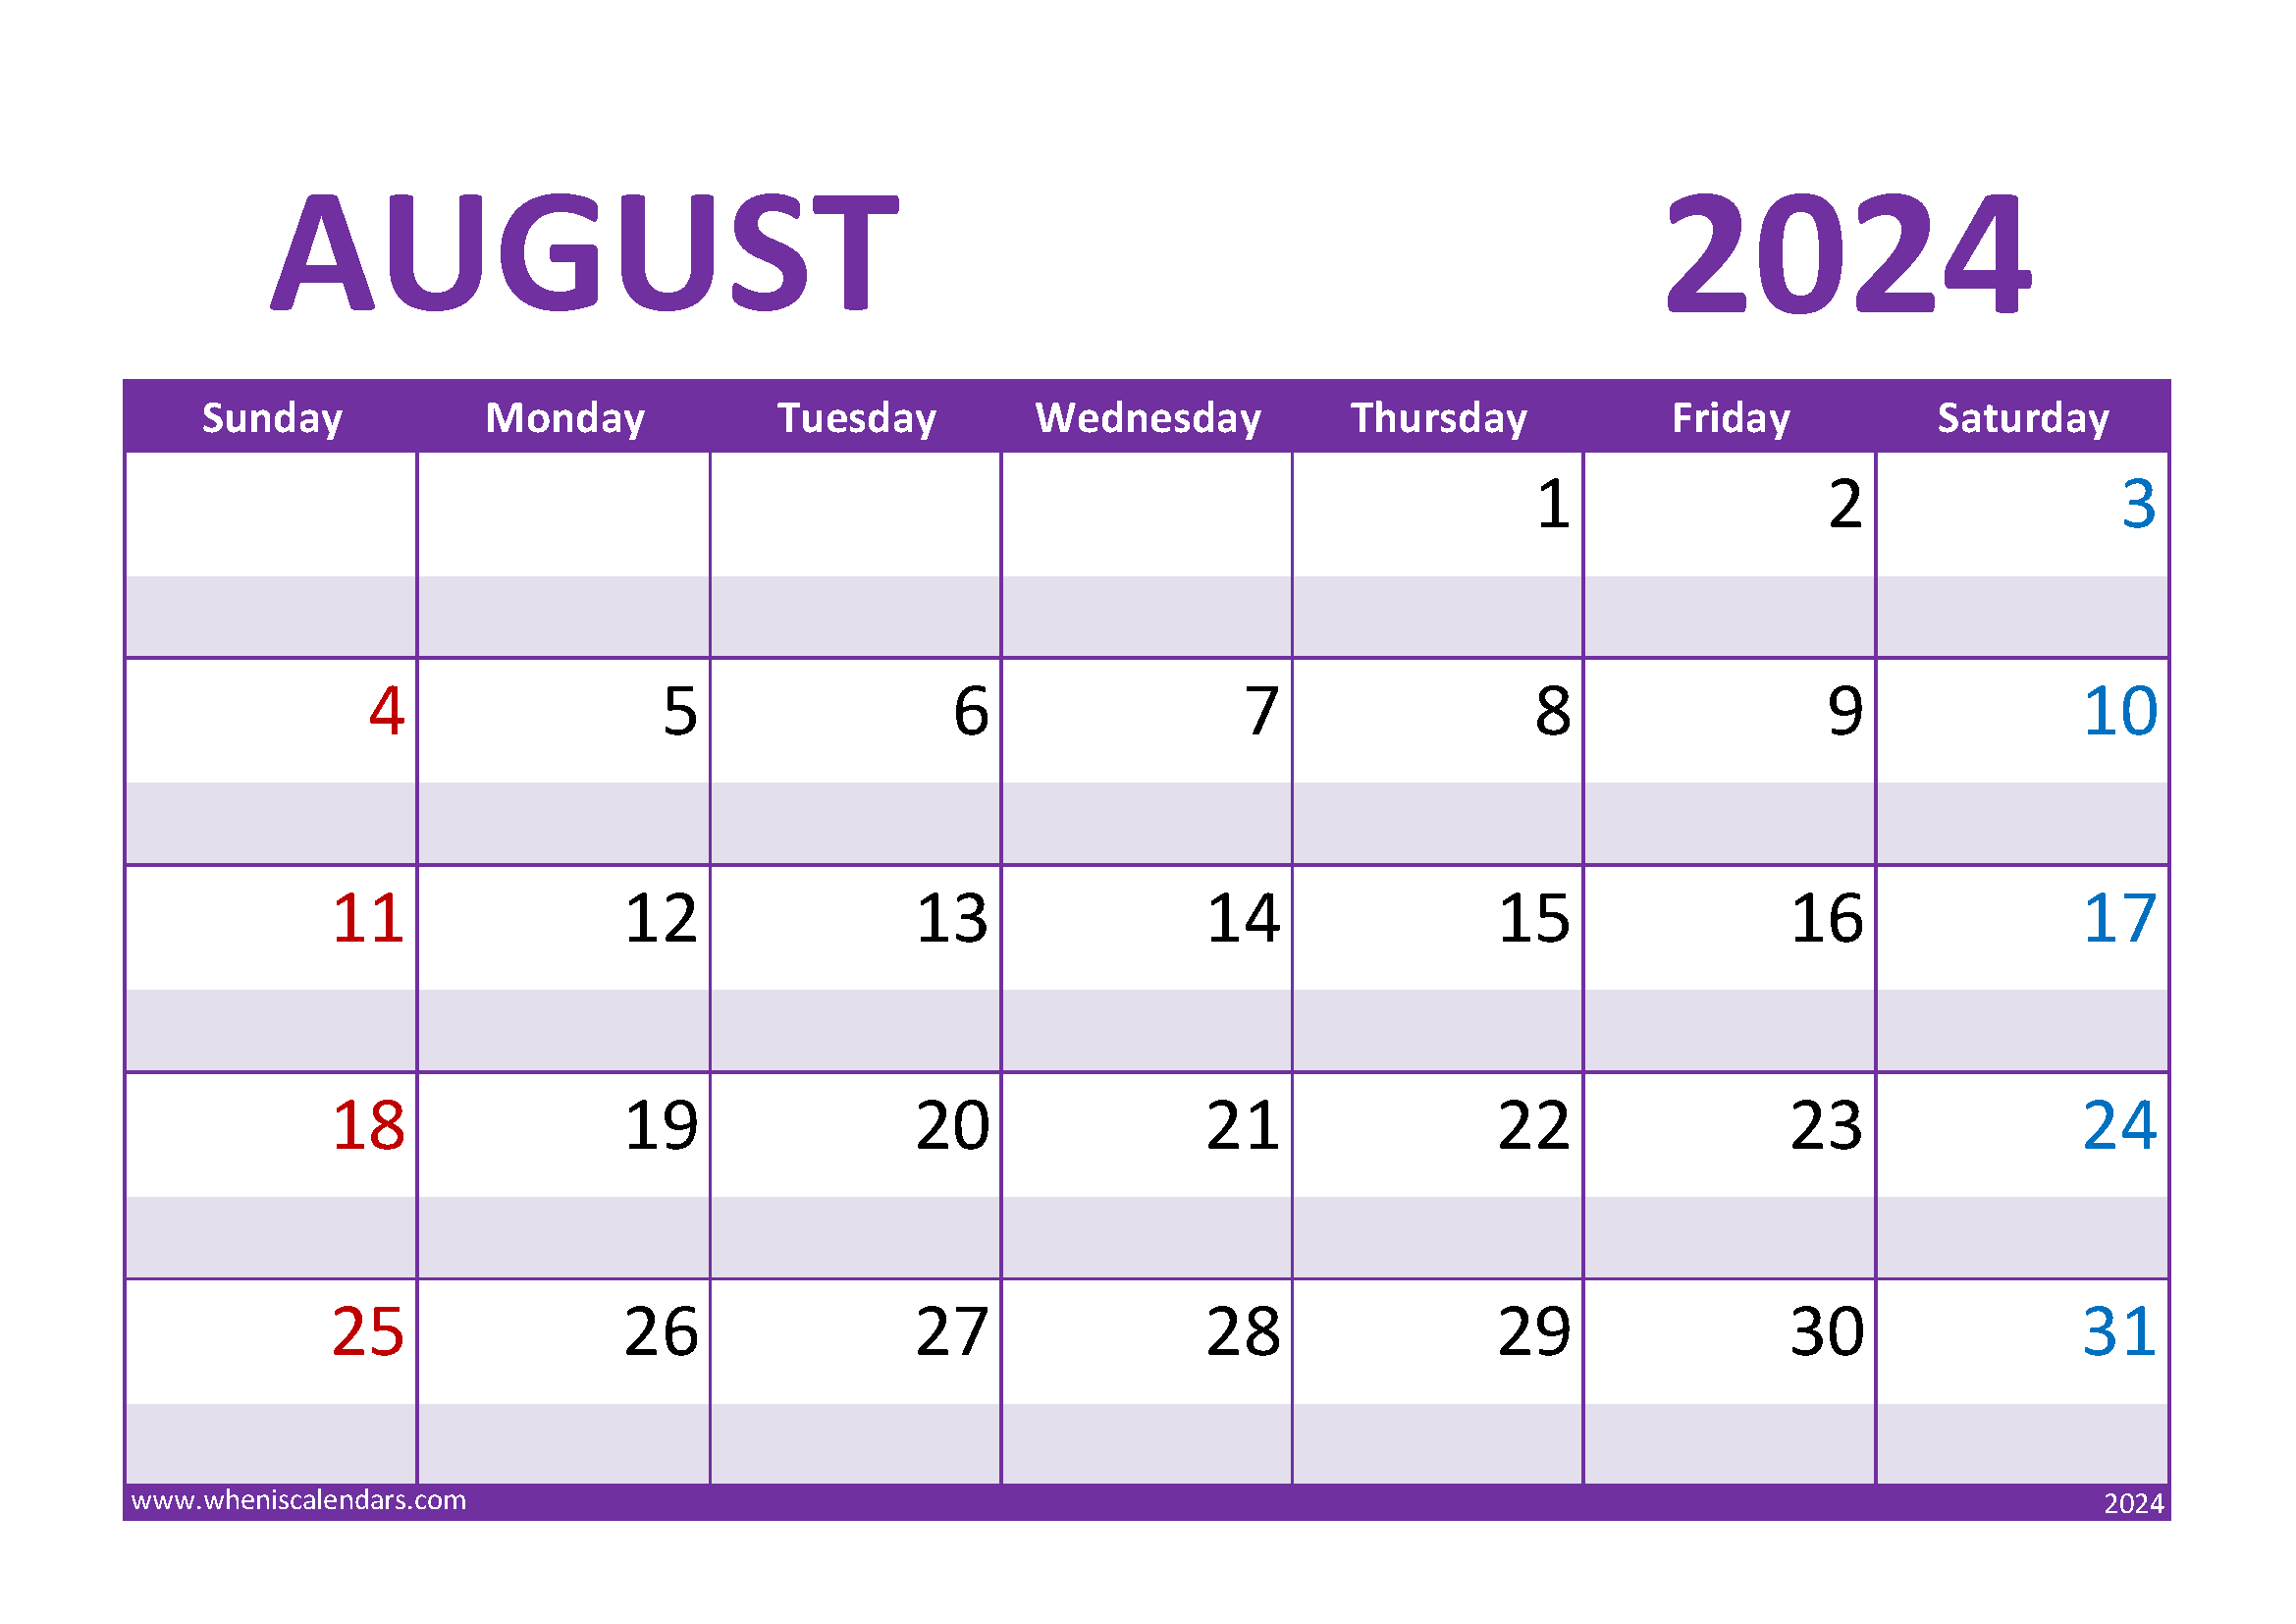 Download August Calendar 2024 with Holidays A4 Horizontal 84022